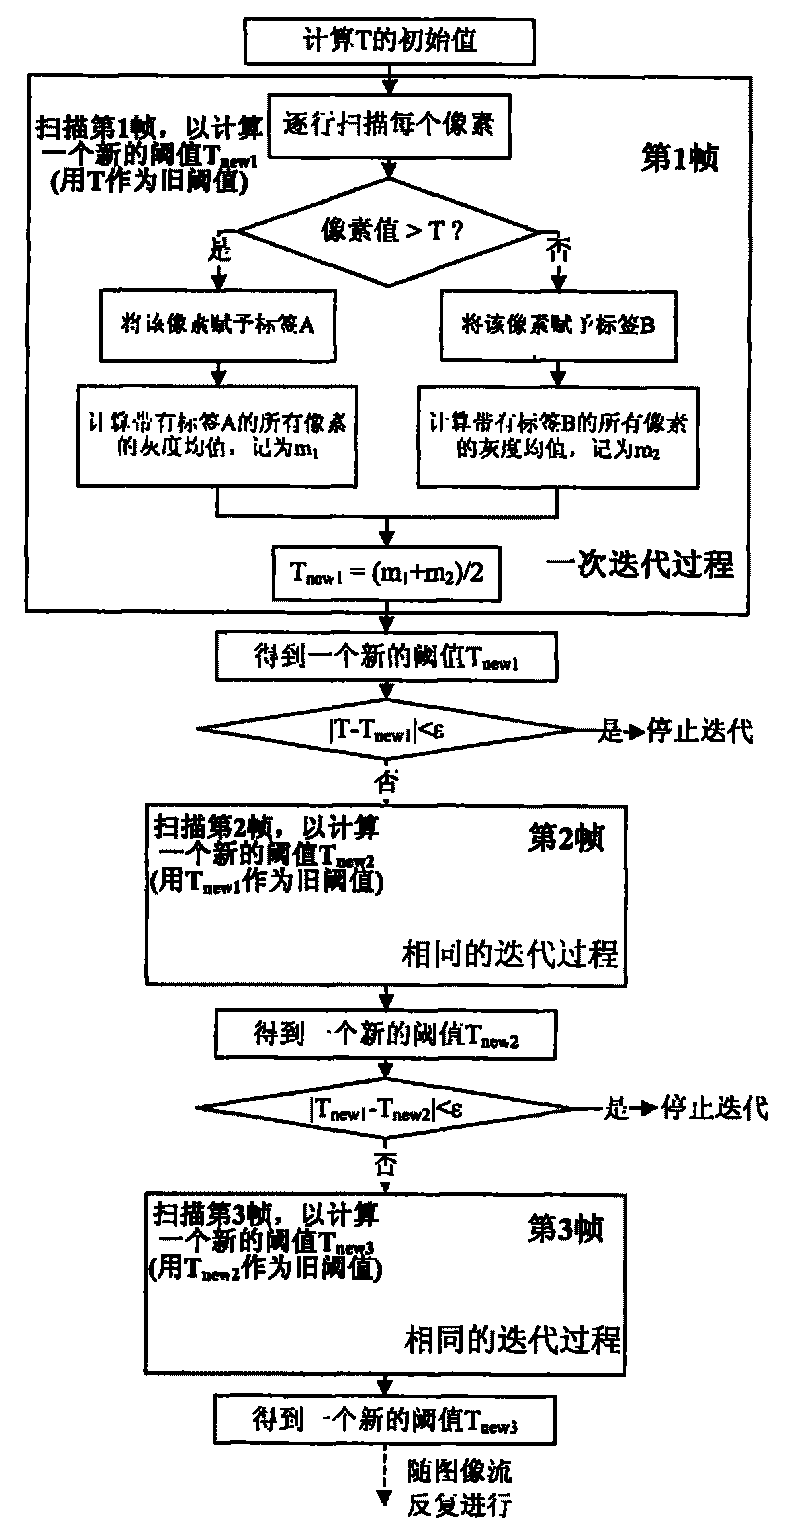 Method realized by parallel pipeline for performing real-time marking and identification on connected domains of point targets